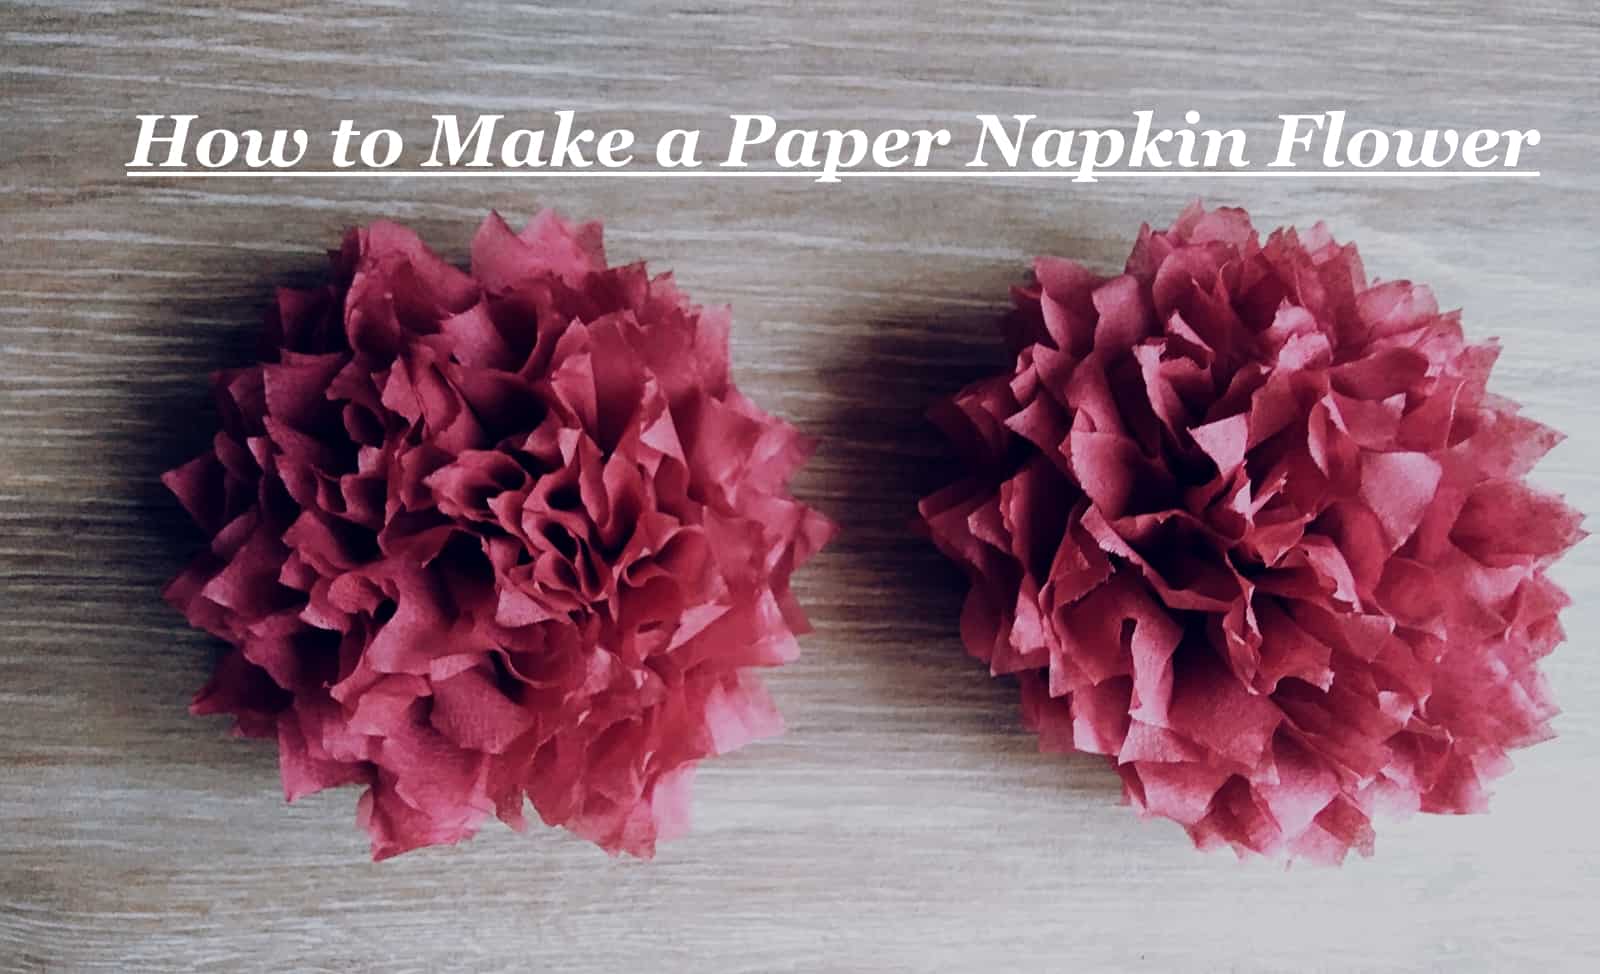 How to Make a Paper Napkin Flower